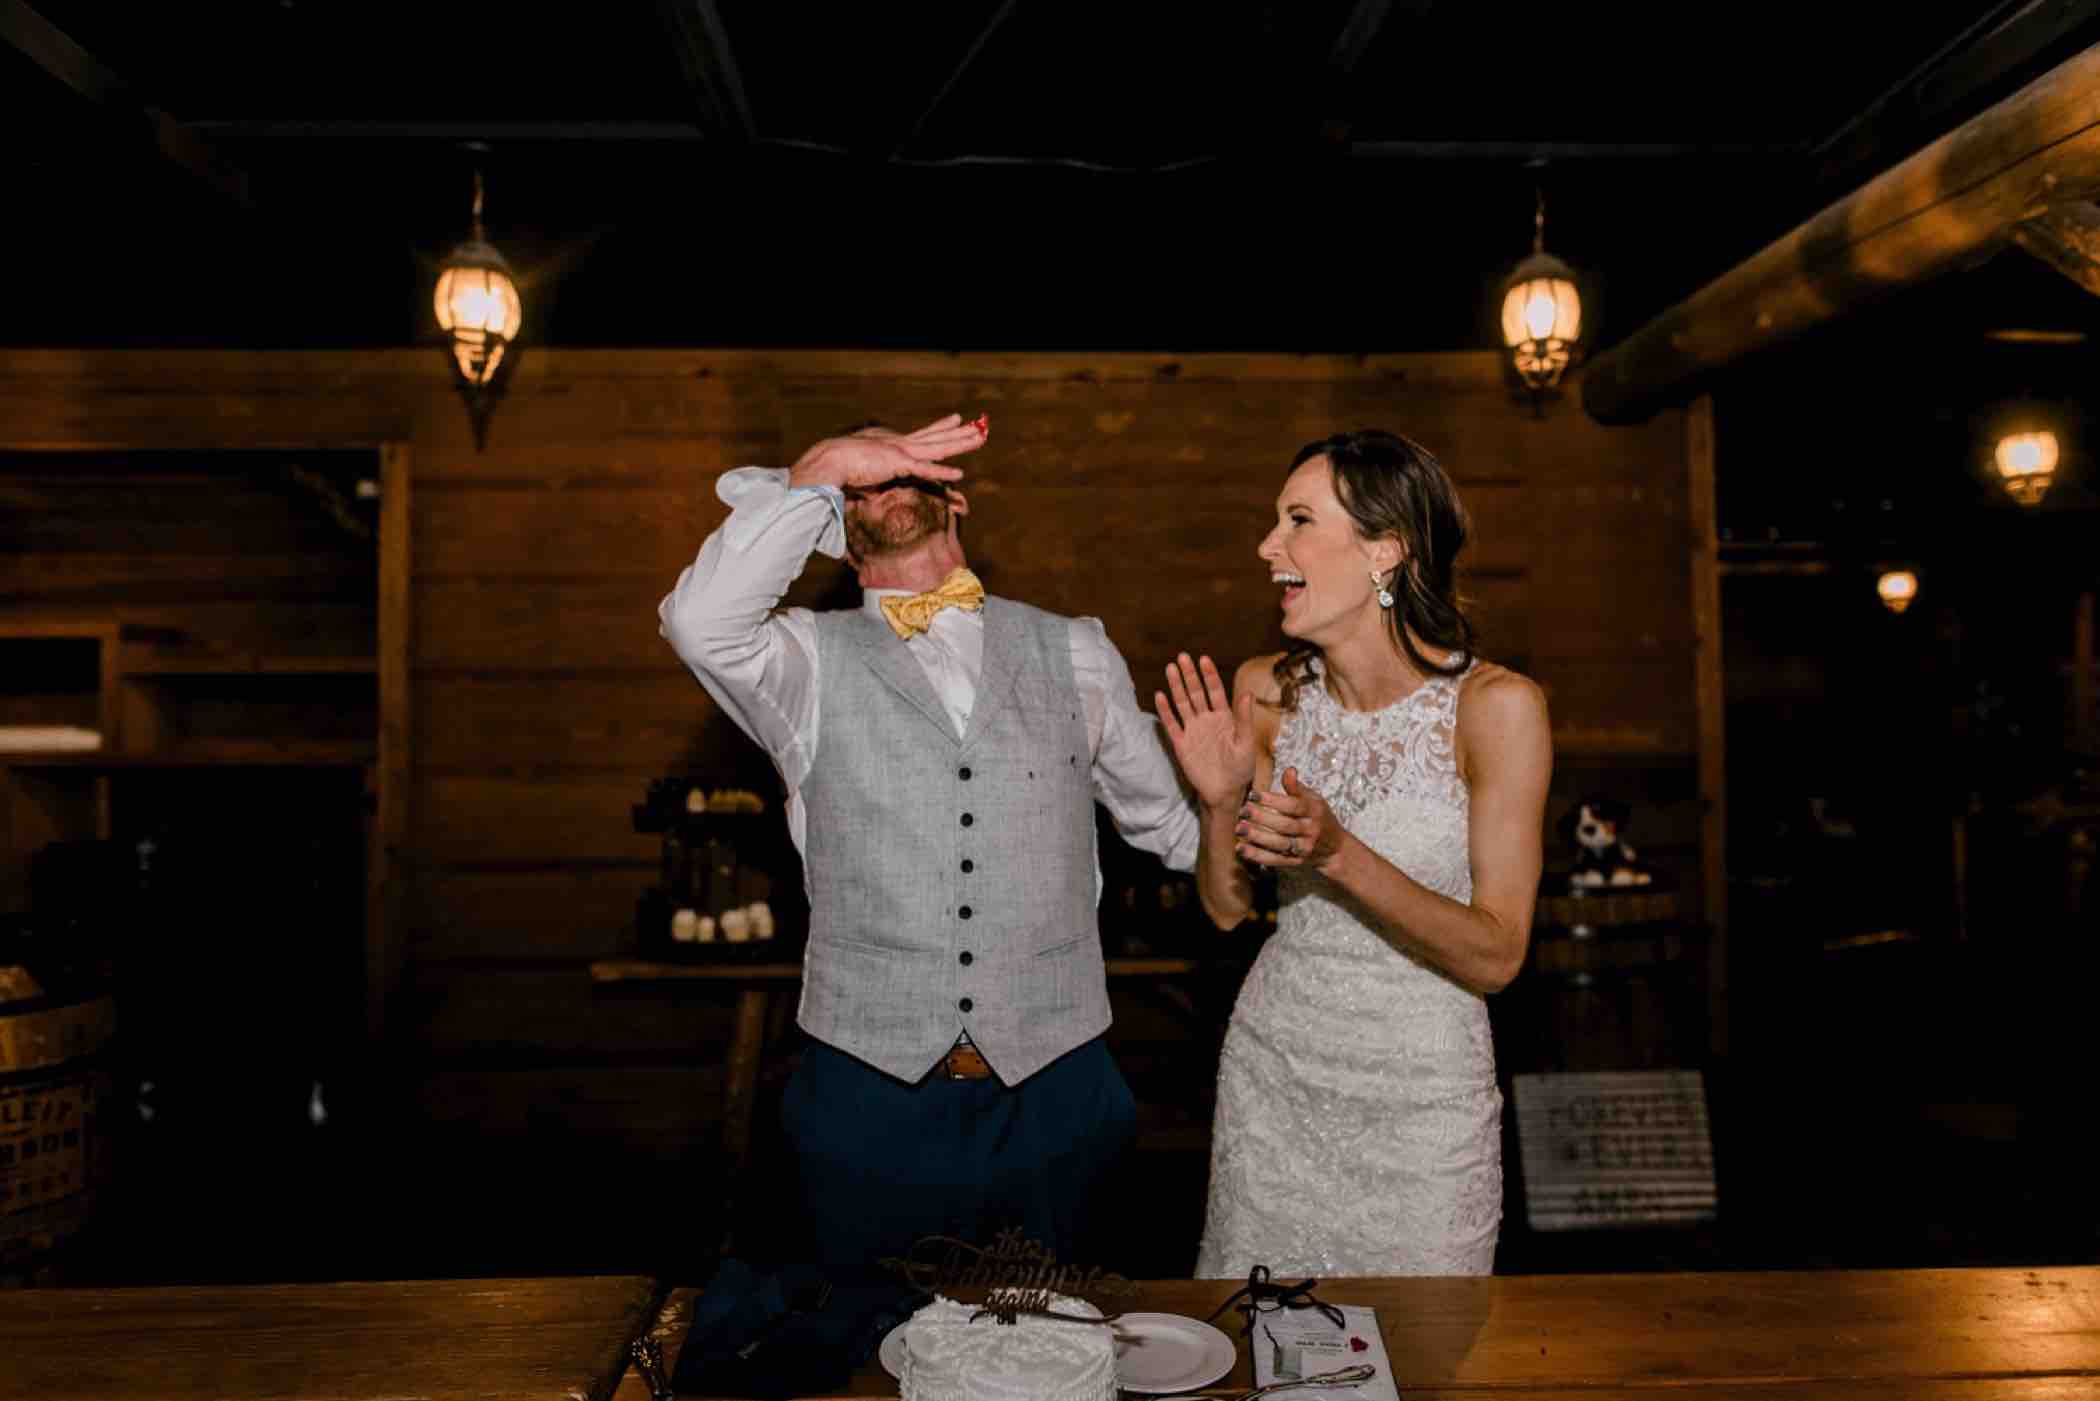 Kris and Sallie get ready to cut the cake at their wedding reception at Piney River Ranch in Vail, Colorado. Photo by Ali and Garrett, Romantic, Adventurous, Nostalgic Wedding Photographers.